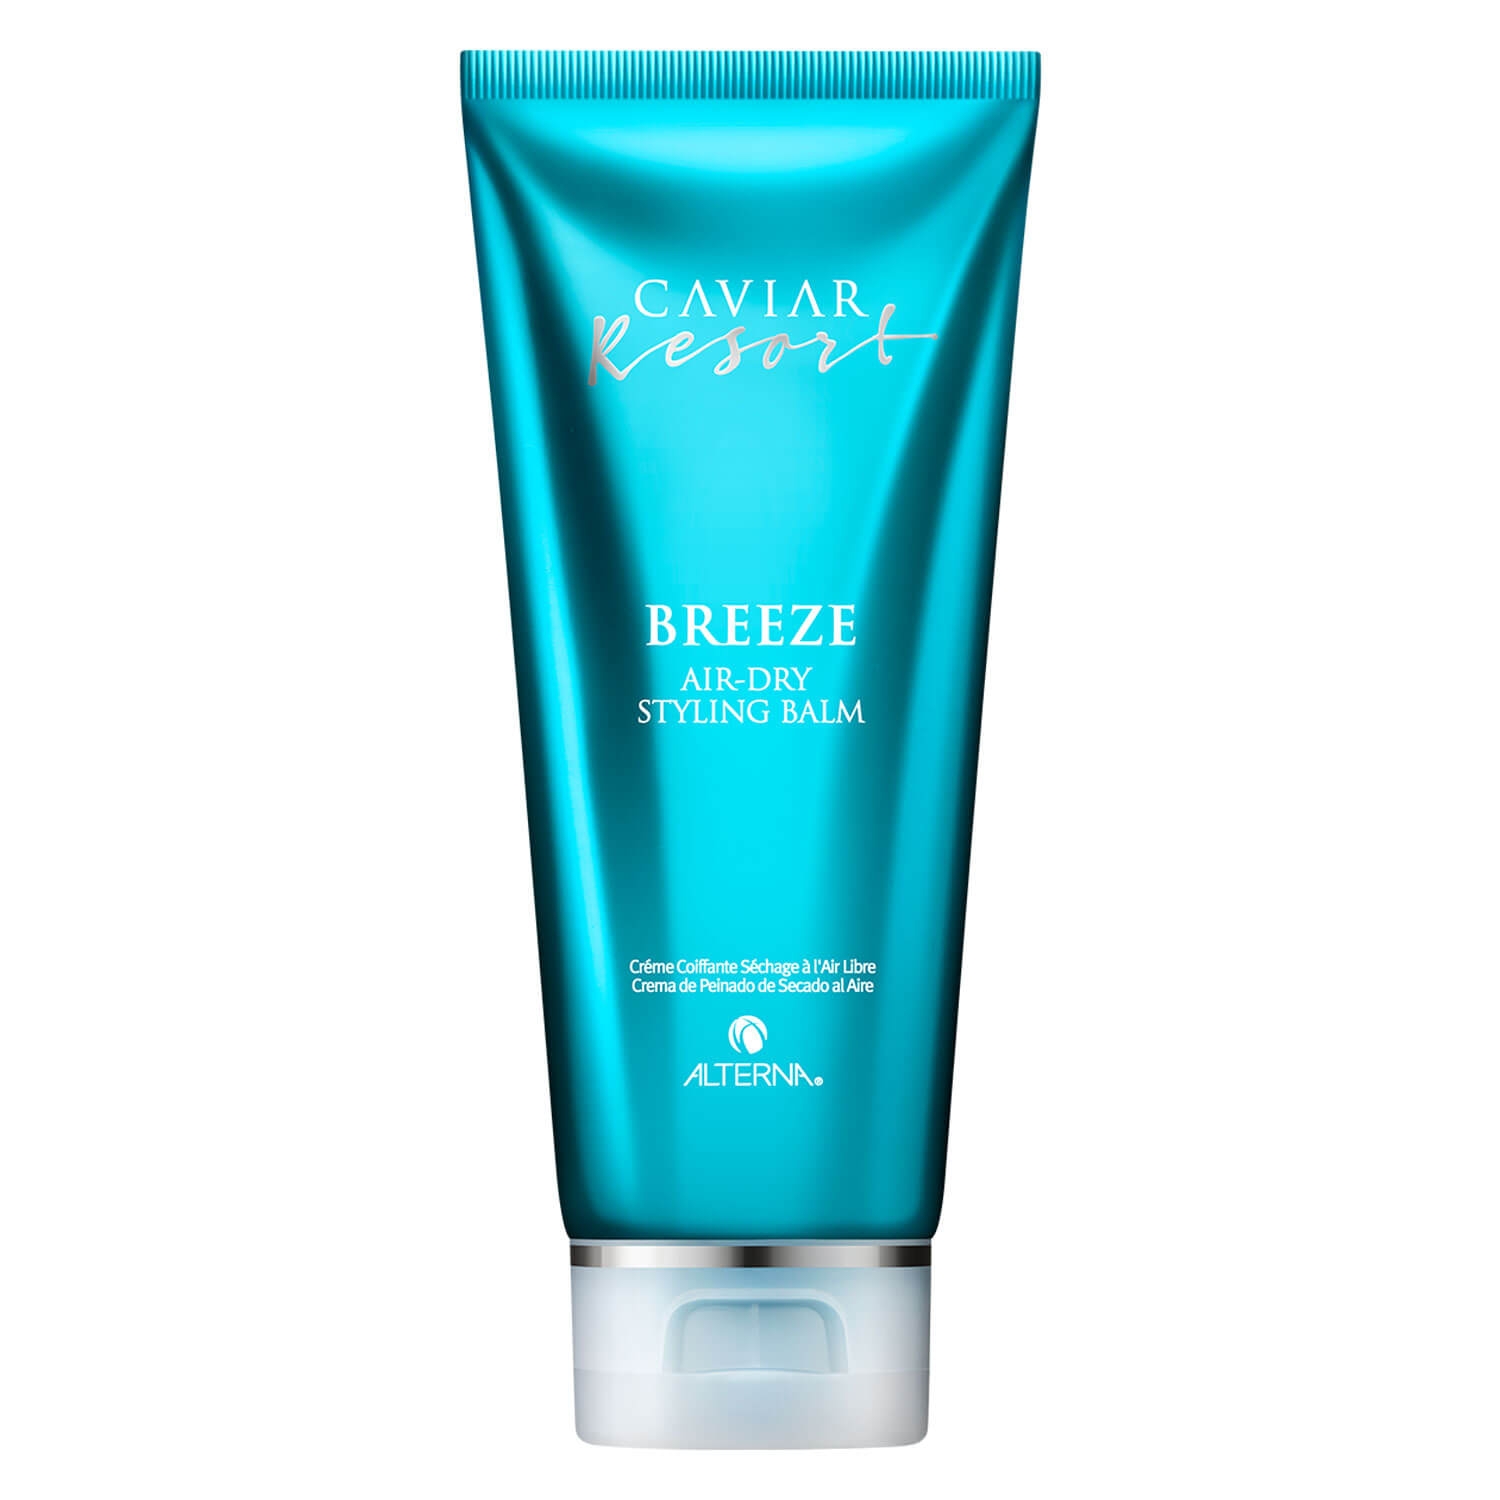 Product image from Caviar Resort - Breeze Air-Dry Styling Balm